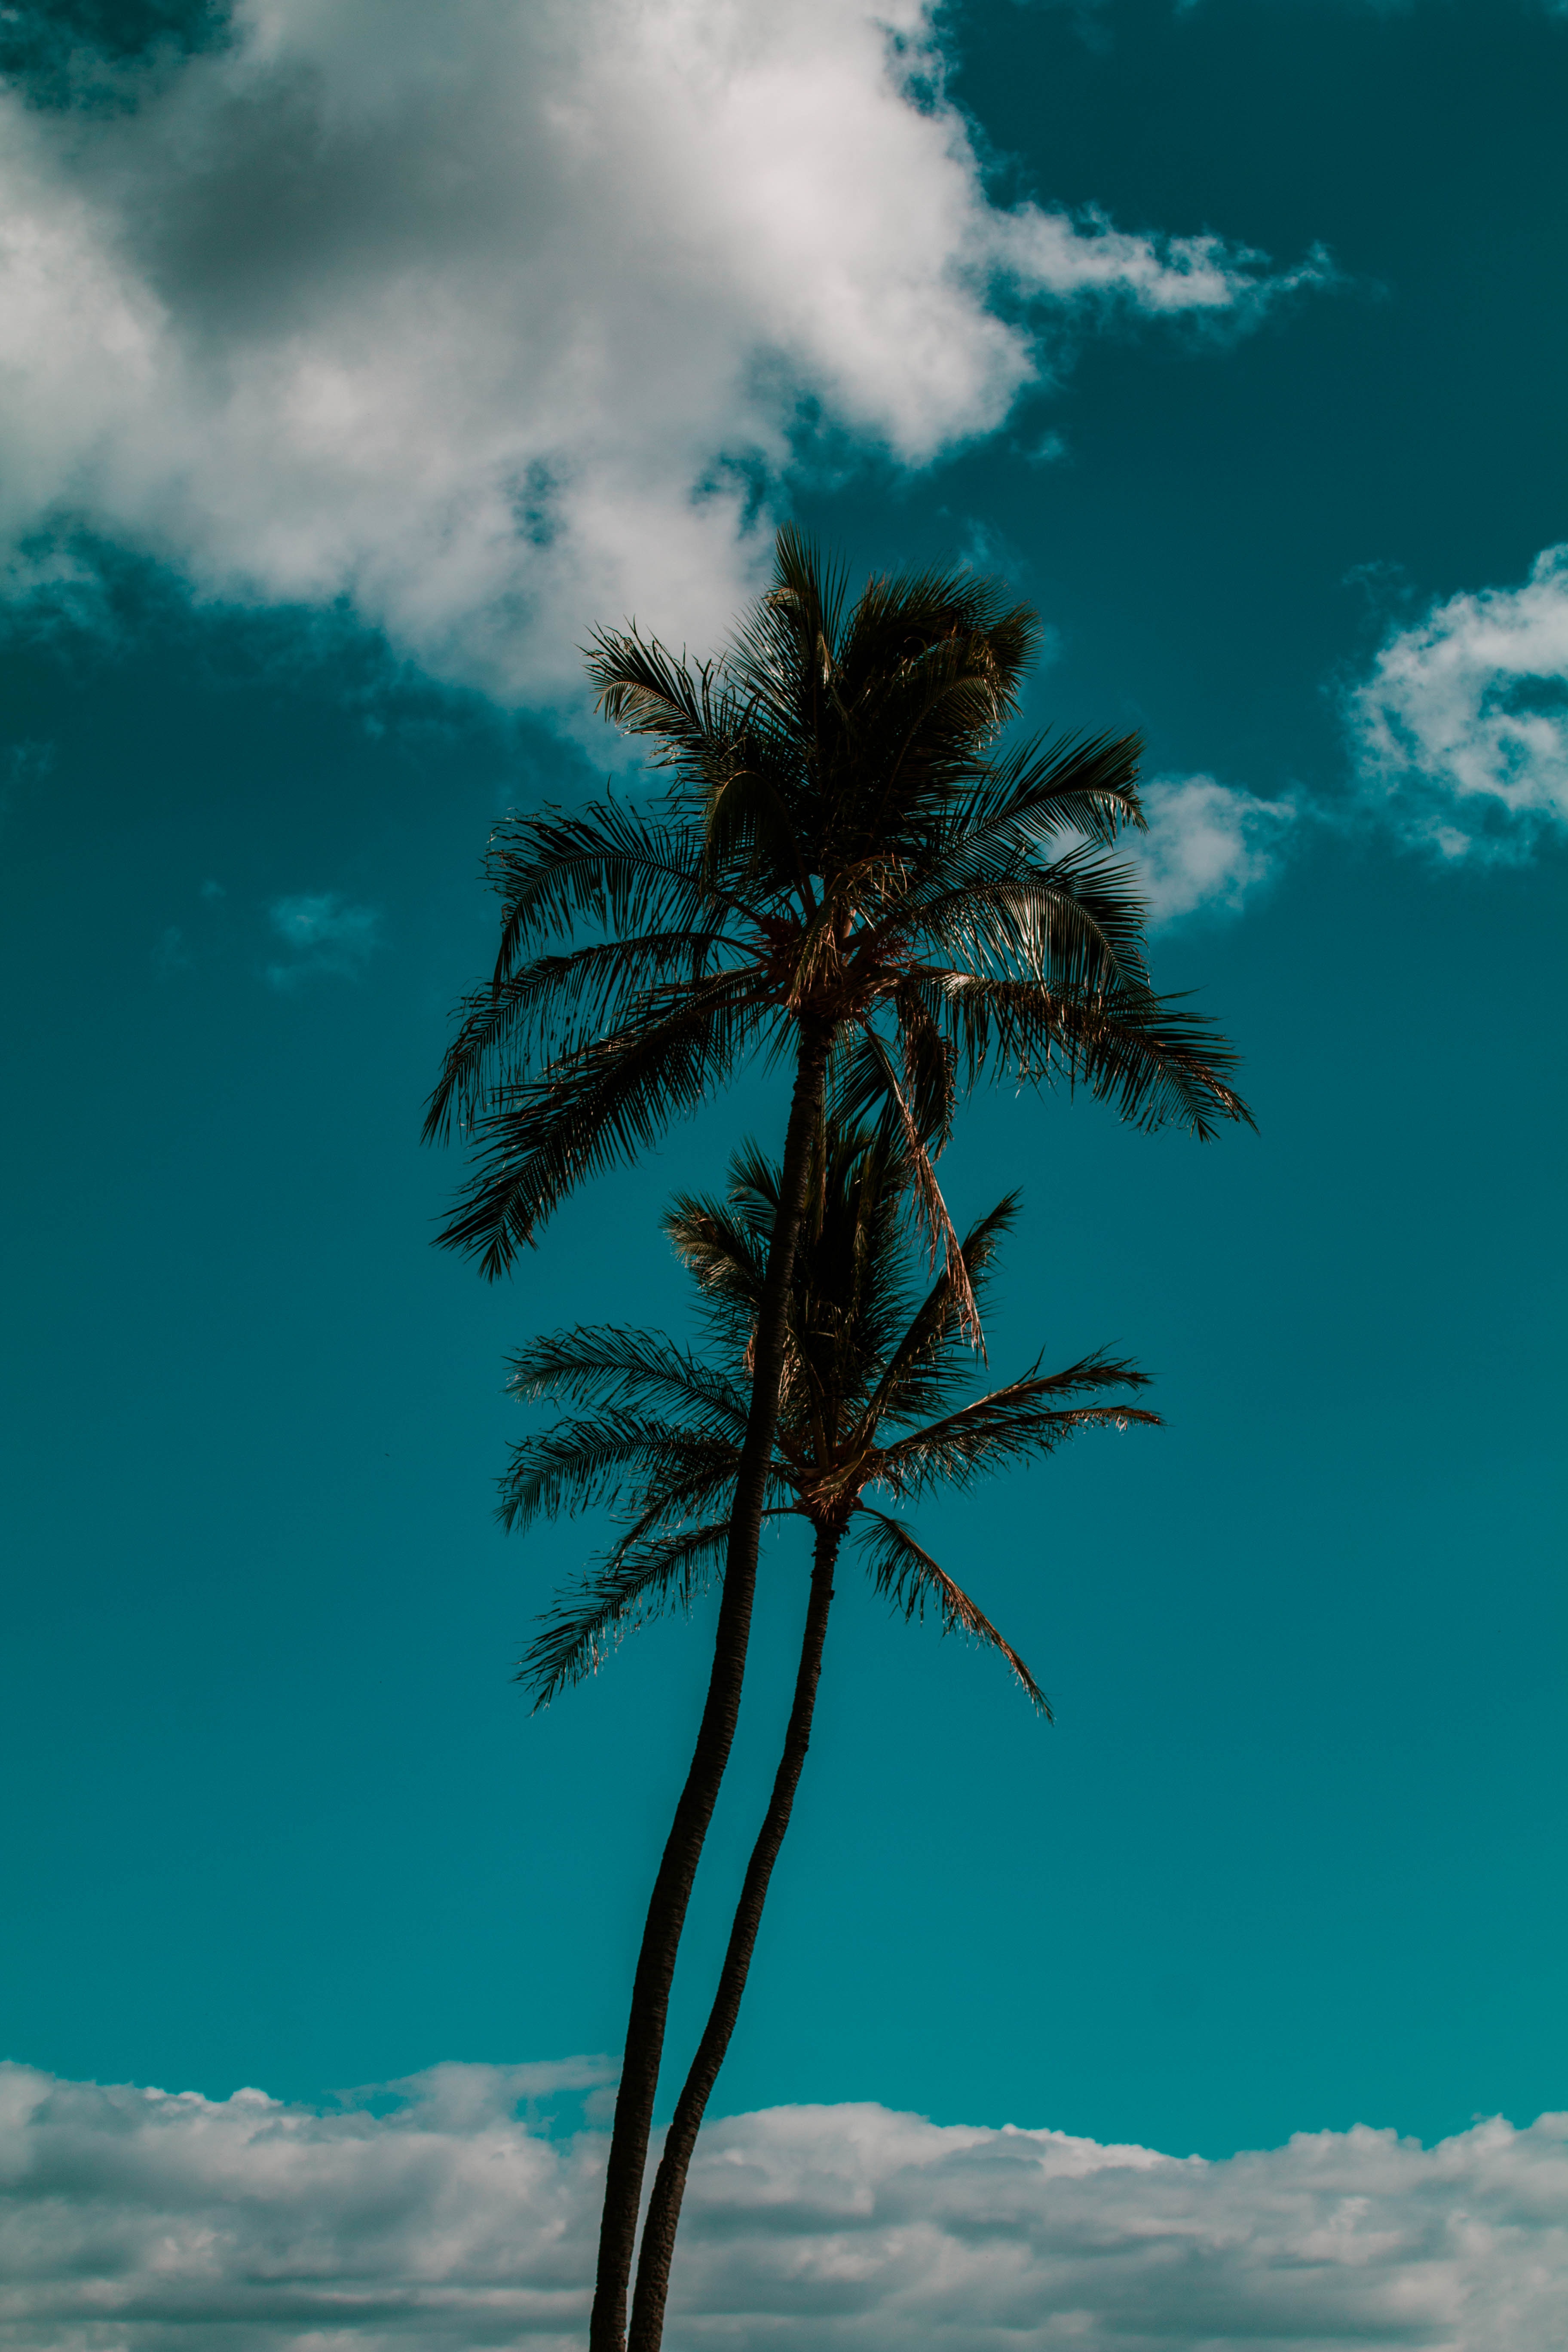 trees, nature, sky, clouds, palm, tropics lock screen backgrounds